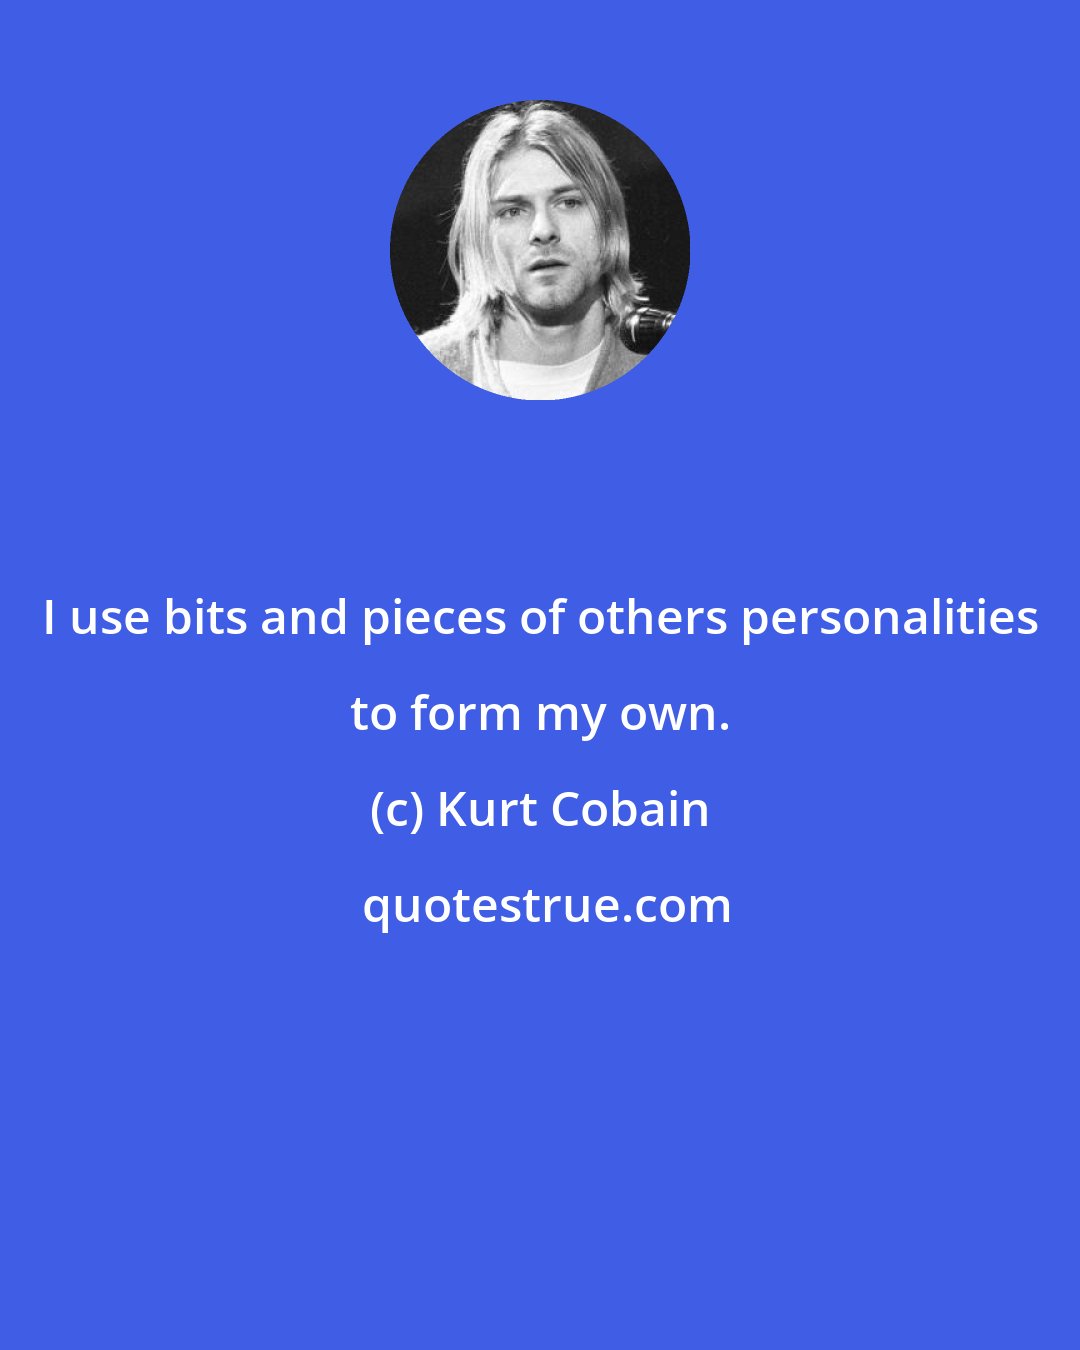 Kurt Cobain: I use bits and pieces of others personalities to form my own.